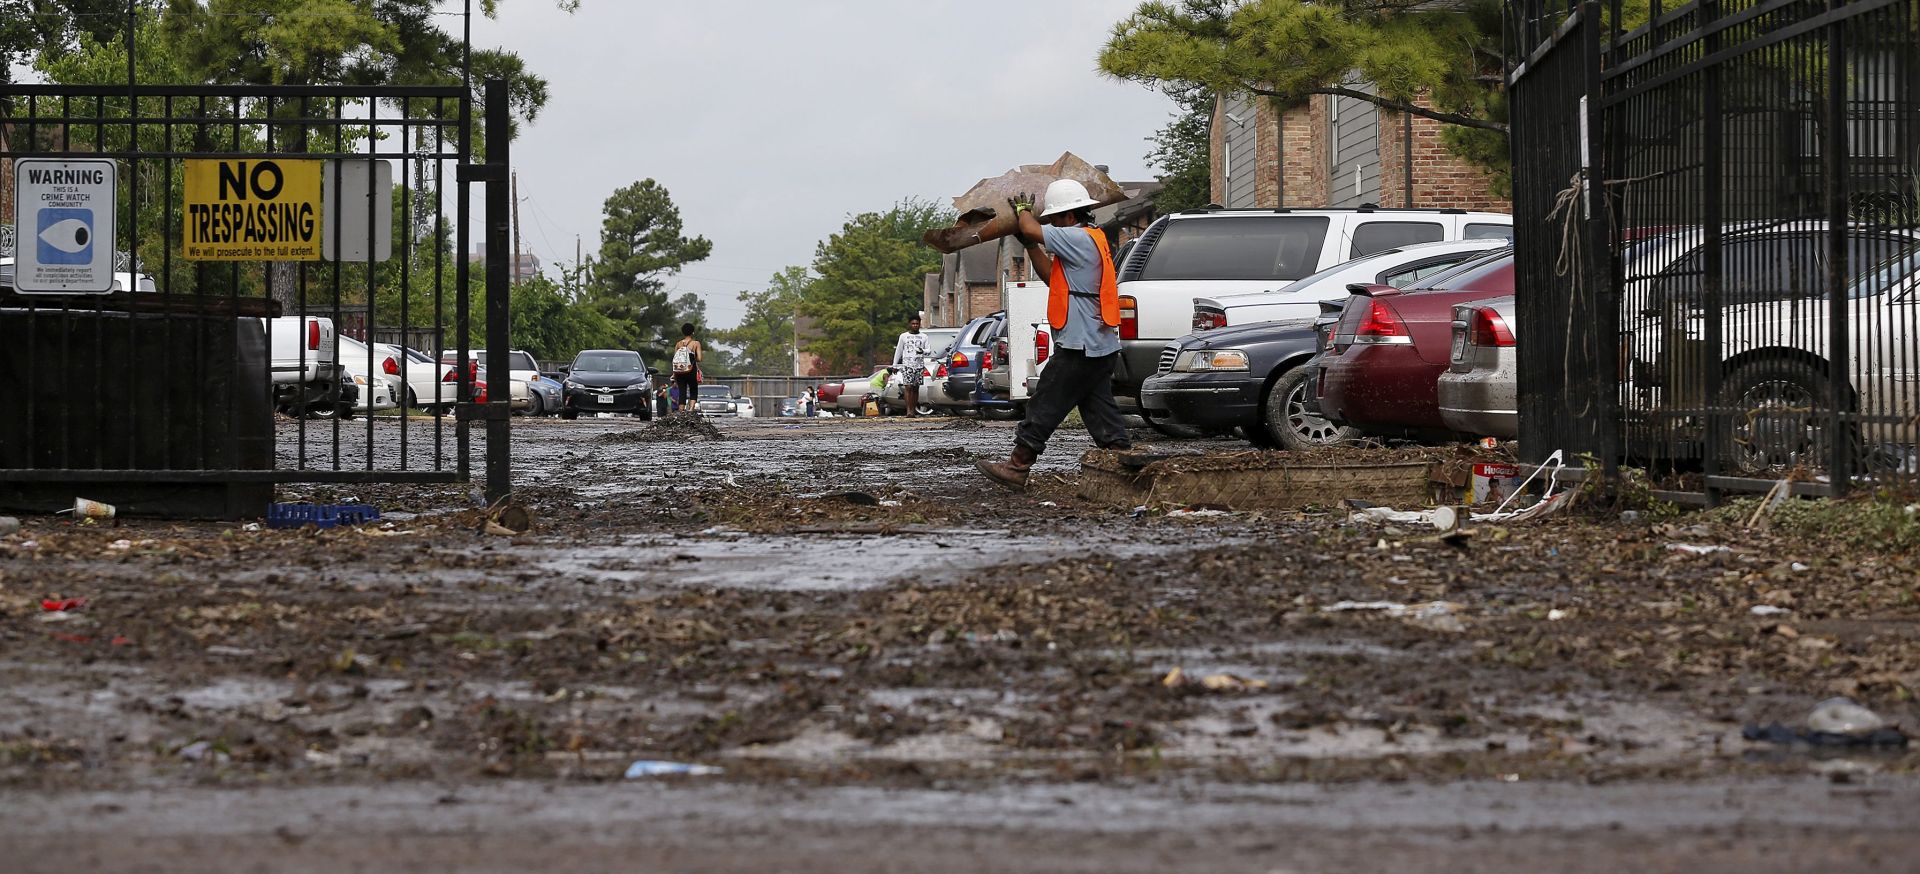 epa05267467 A worker removes flood debris following days of heavy rains and flash flooding in Houston, Texas, USA, 19 April 2016. Recent storms dumped more than a foot (30 cm) of rain in the area causing flooding to dozens of neighborhoods across the Houston metropolitan area.  EPA/AARON M. SPRECHER